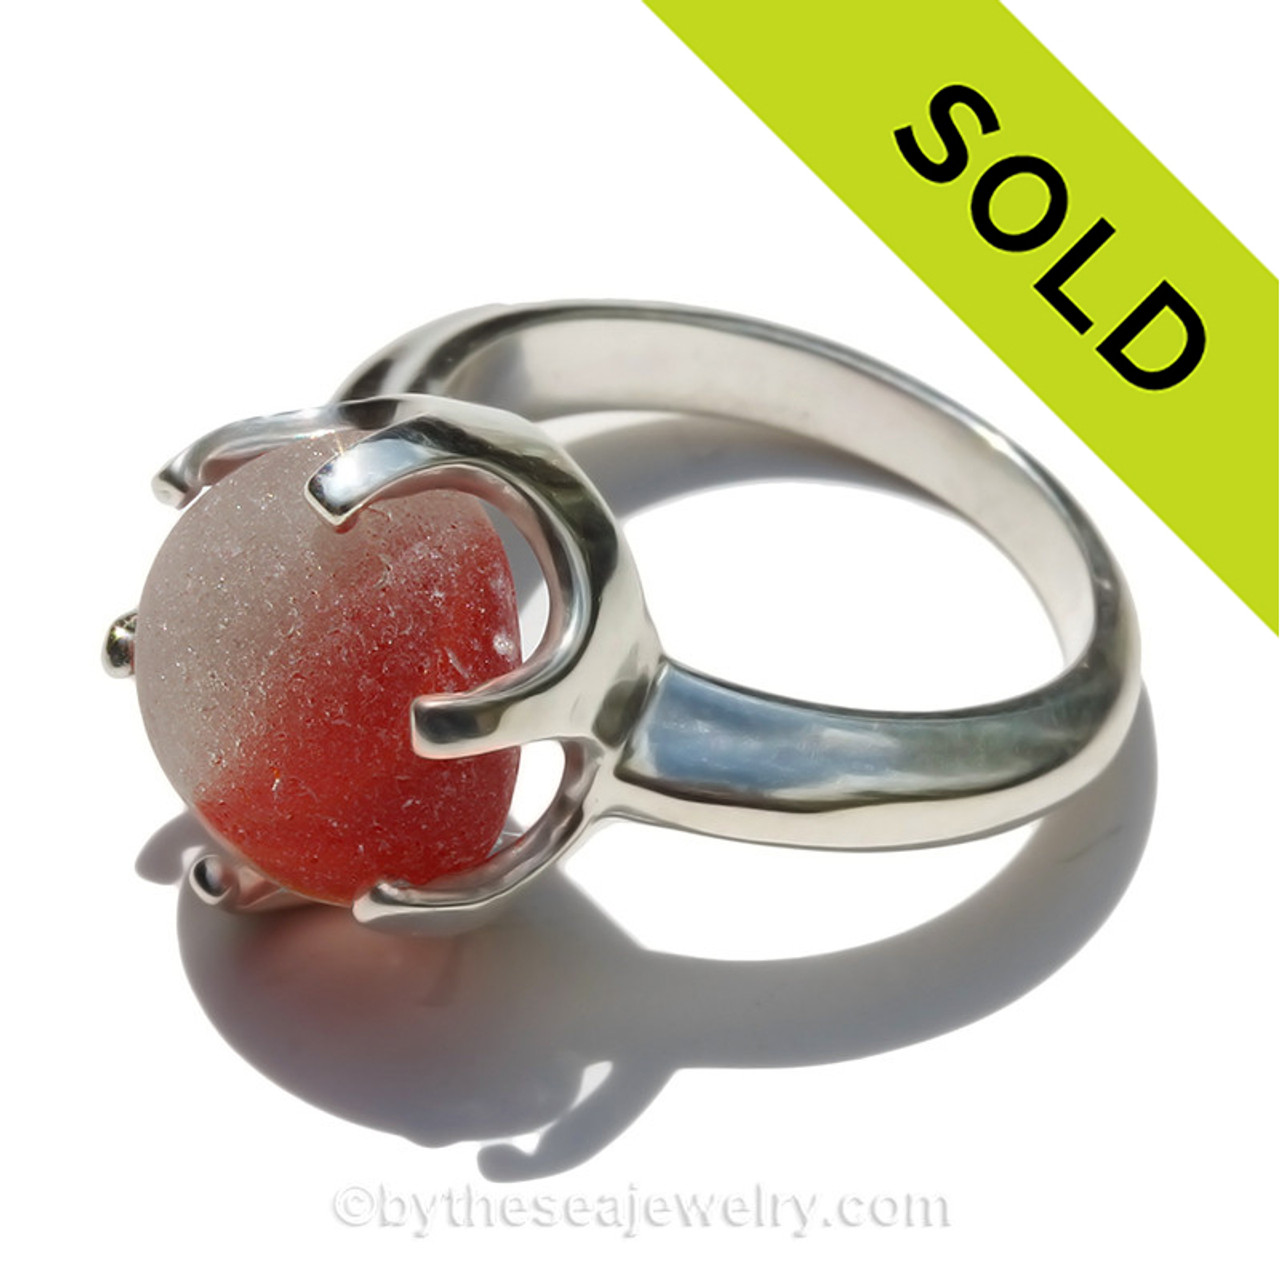 Teal Marble Stone Ring sold by emily thai jewelry on Storenvy